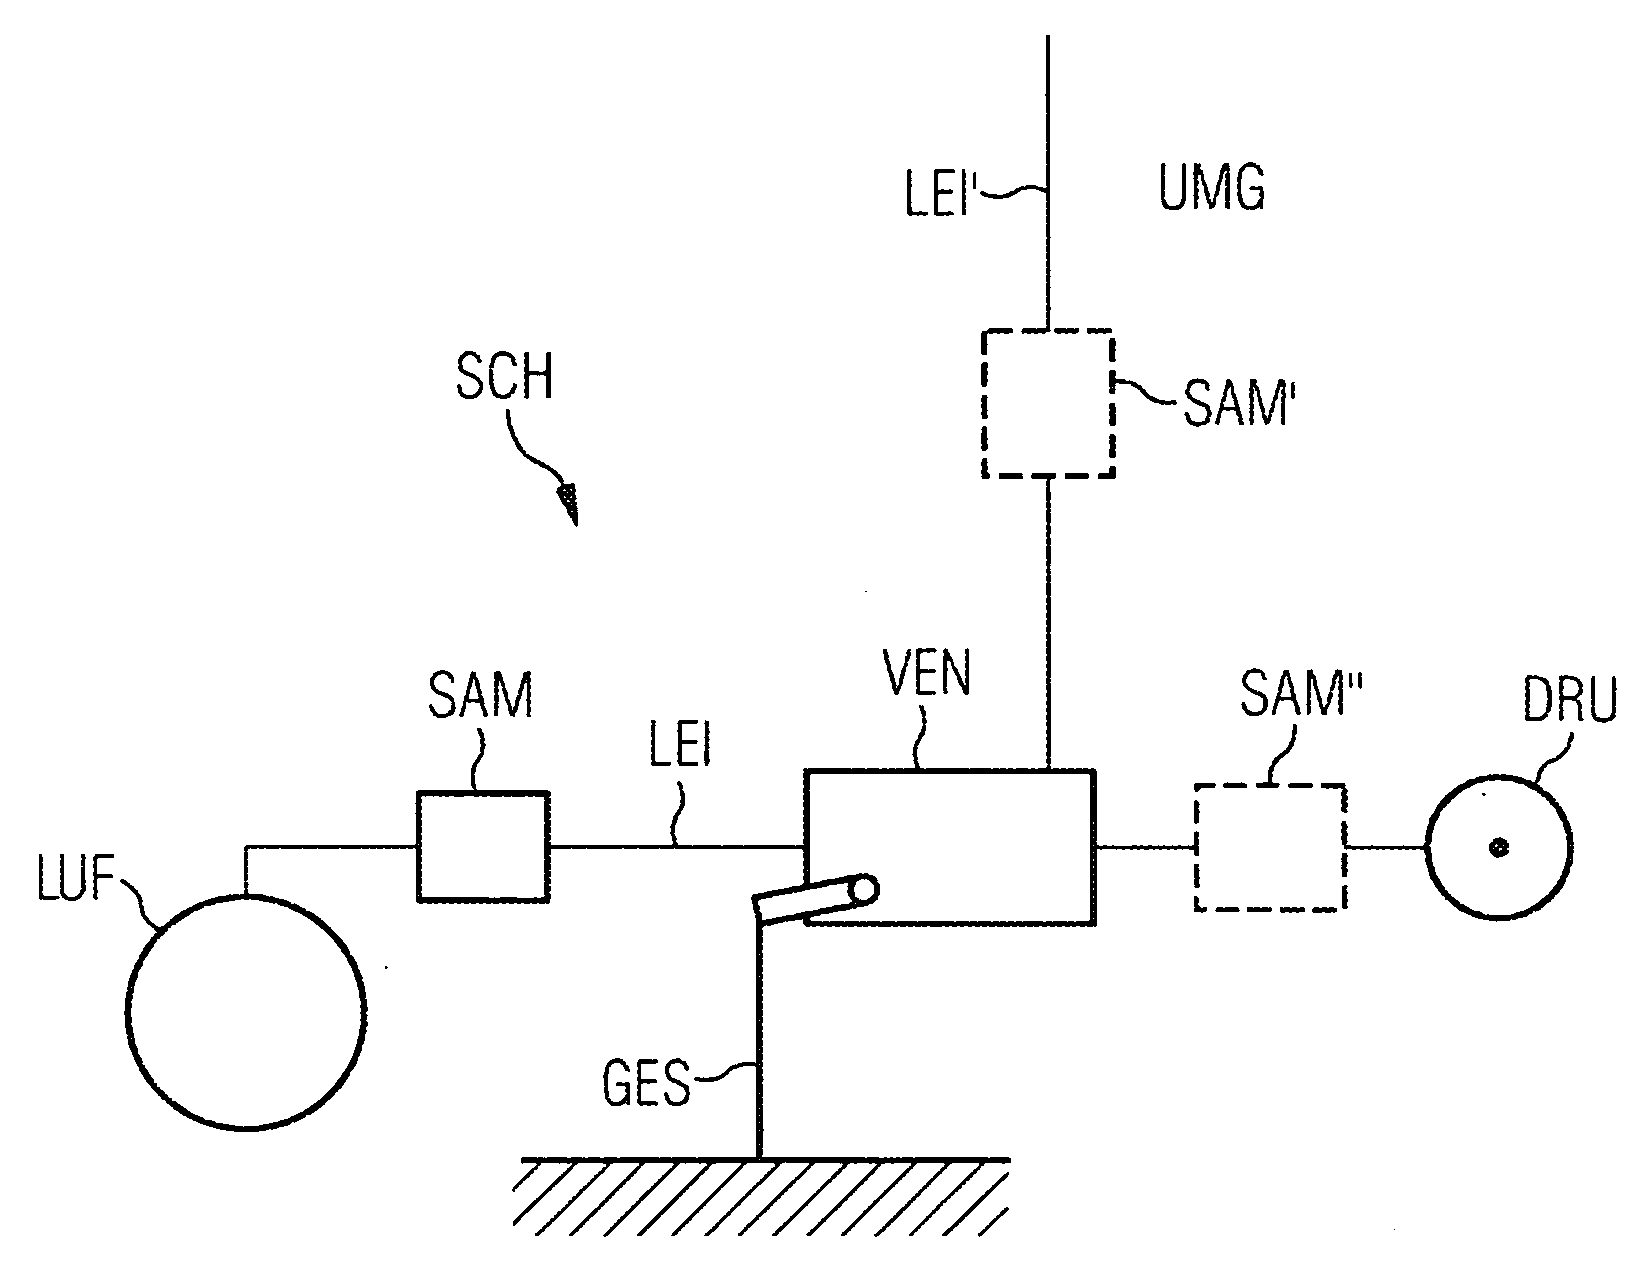 Electronic Pneumatic Spring Controller for Reducing Air Consumption and Rapidly Adjusting the Setpoint Level